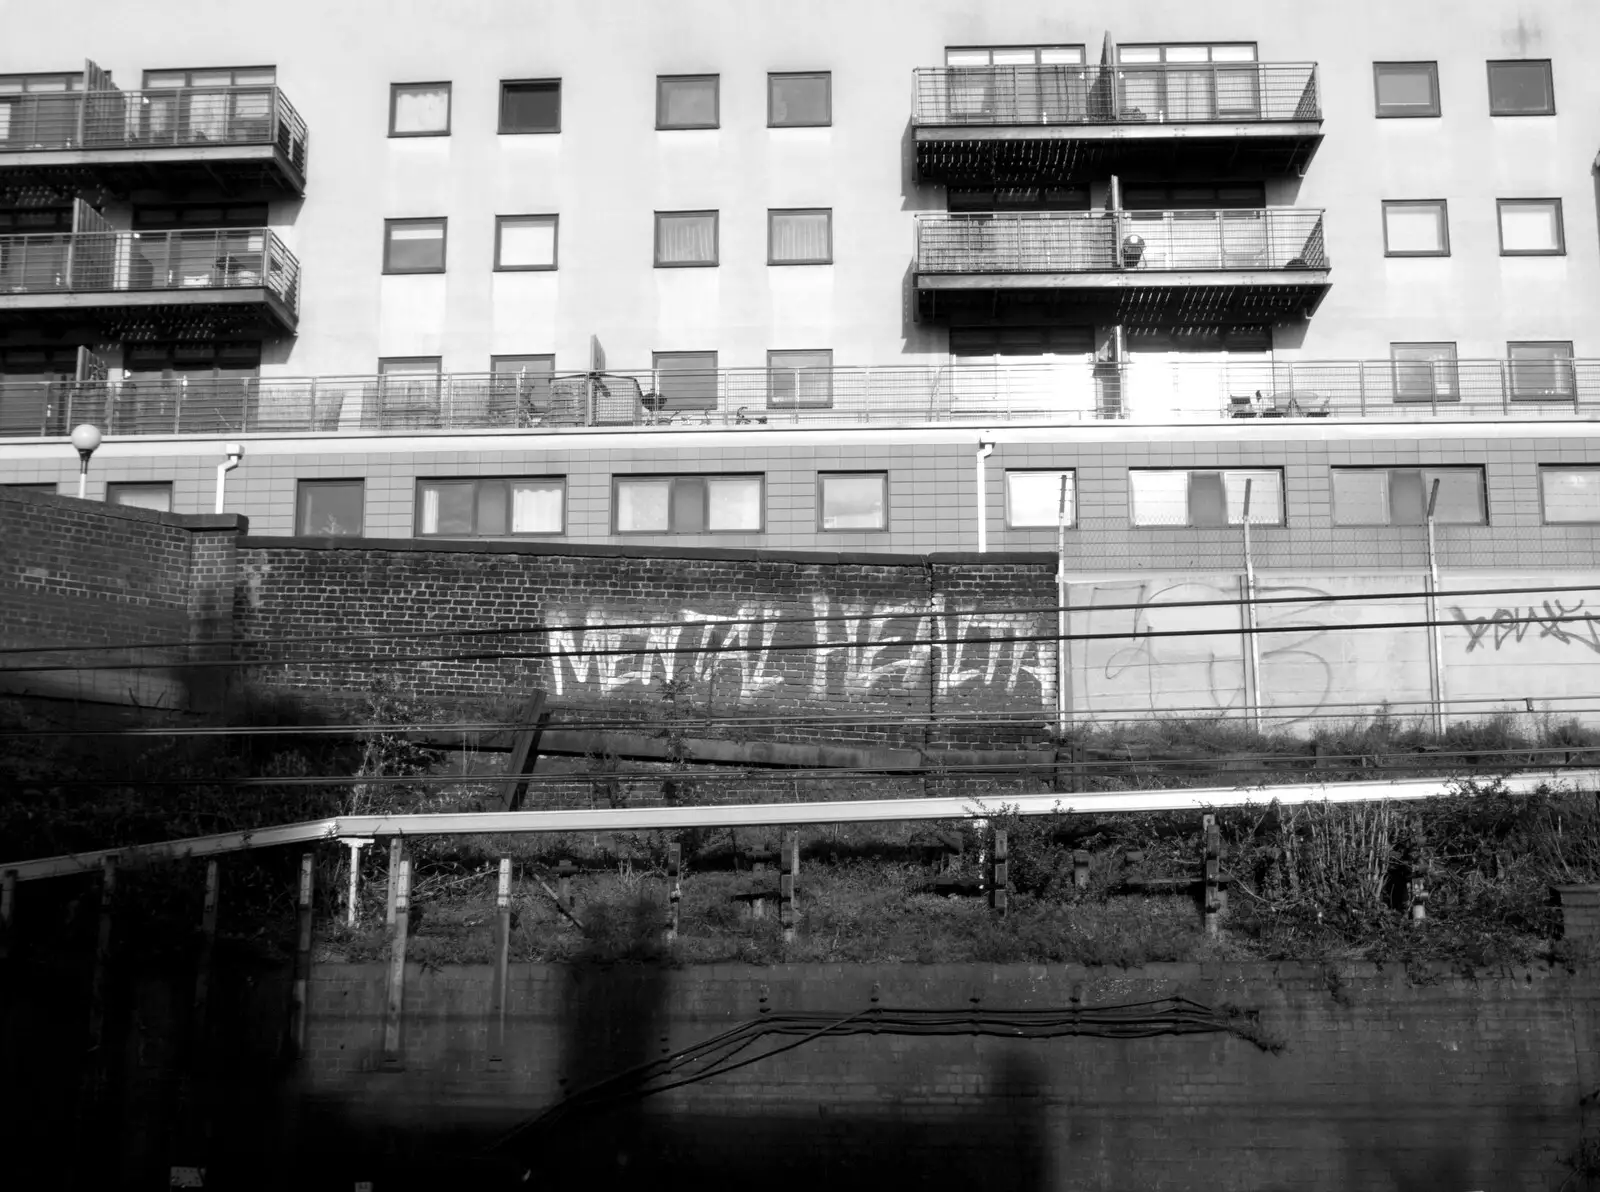 Mental Health tag on a wall, from Broken-down Freight Trains, Manor Park, London - 28th January 2020